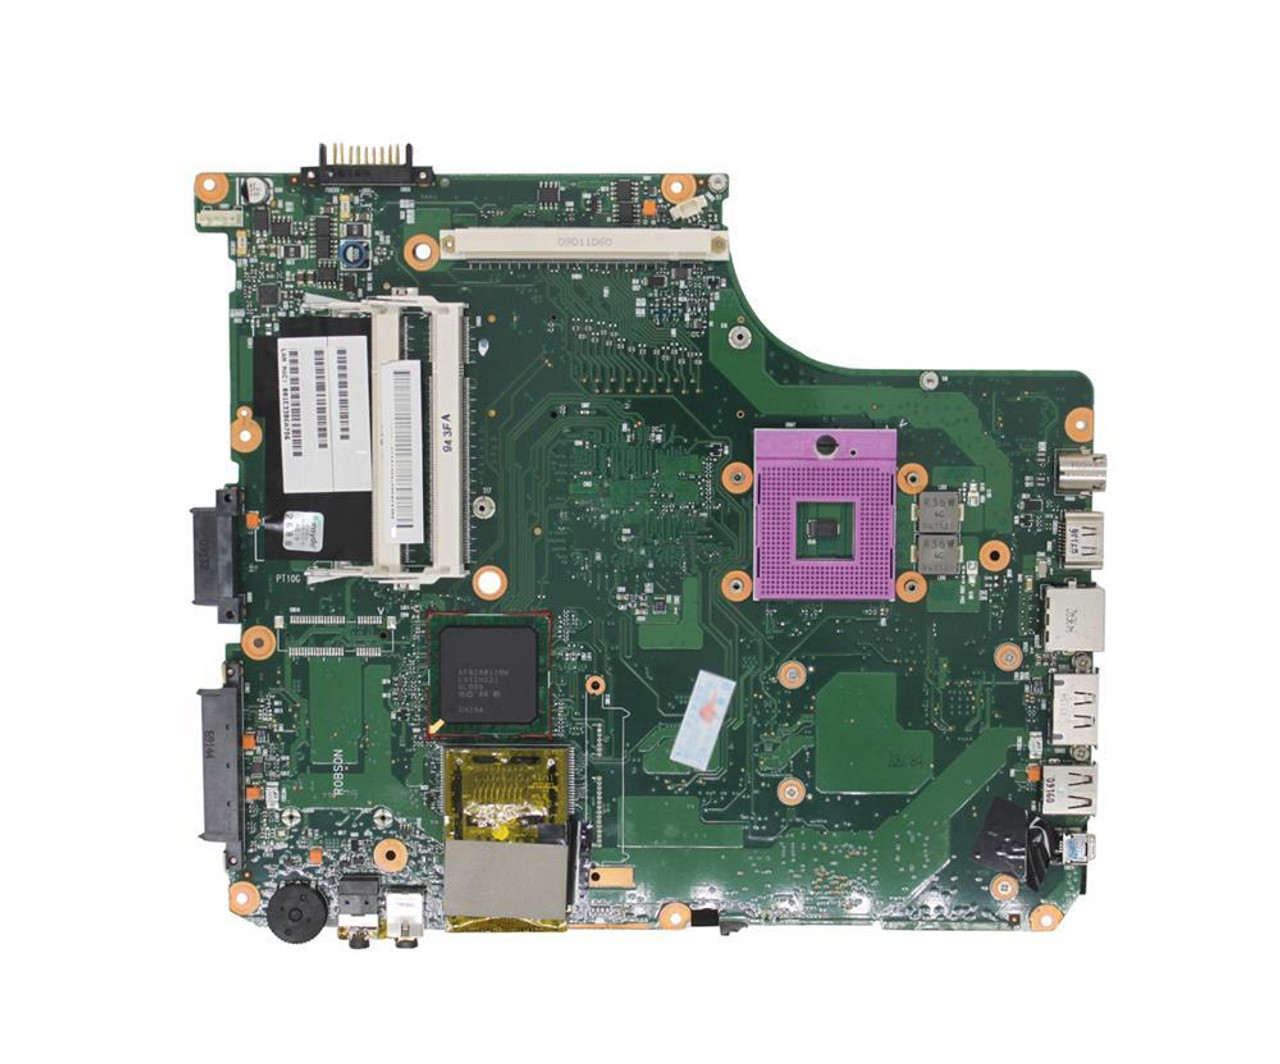 V000125700 Toshiba System Board (Motherboard) for Satellite A300 A305 (Refurbished)